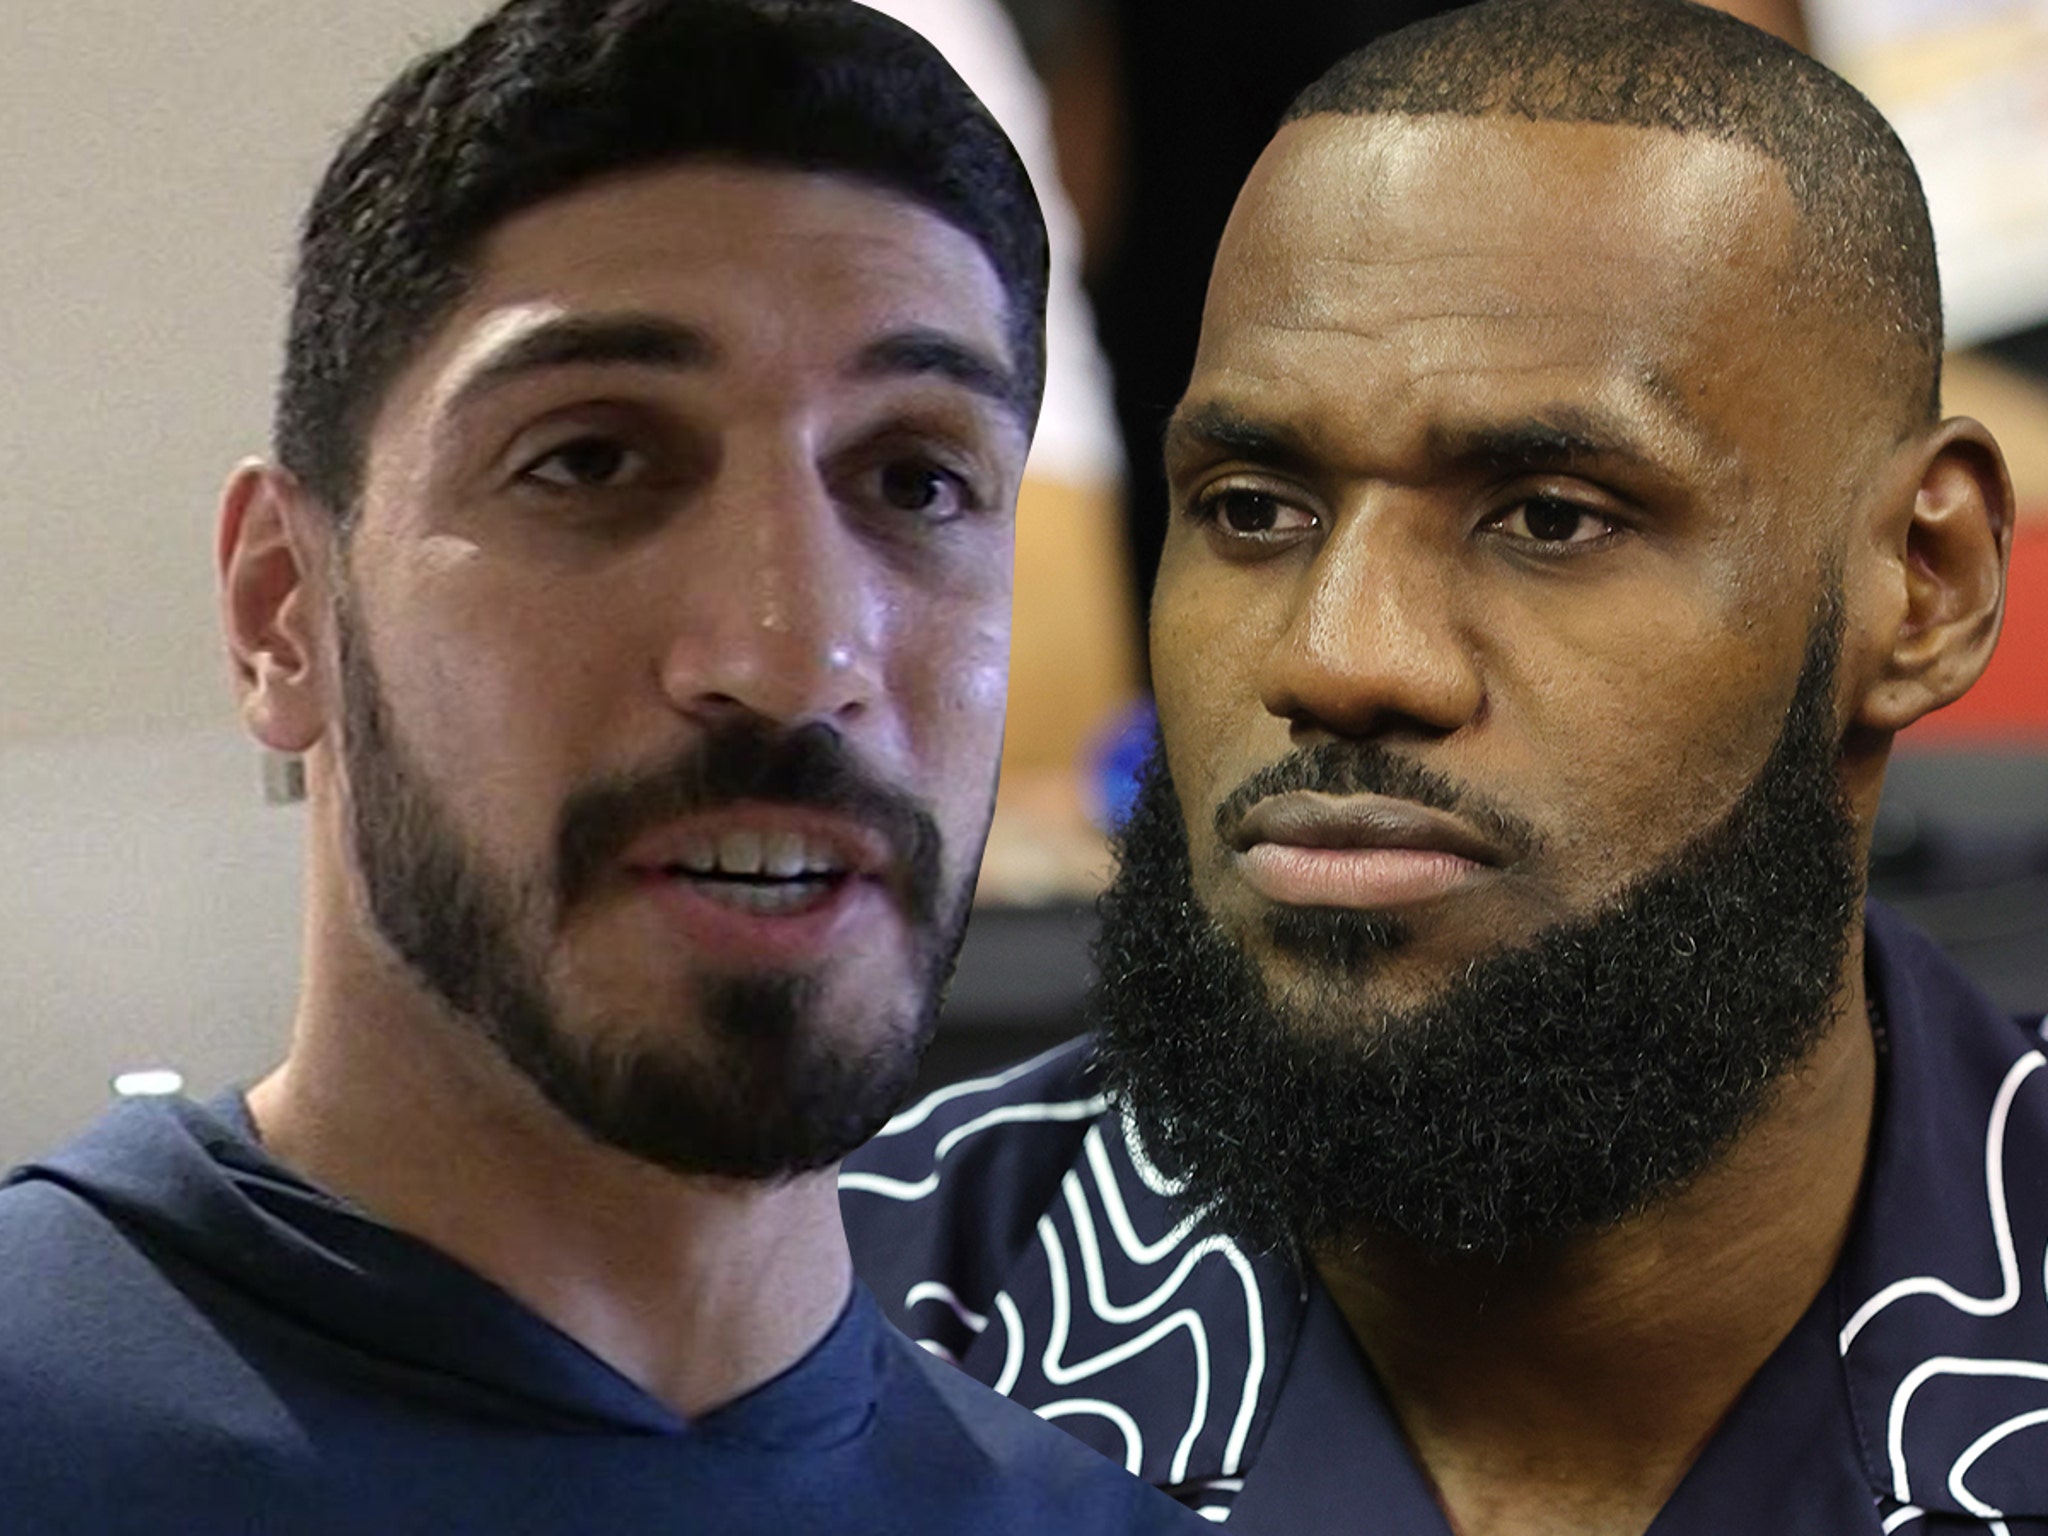 LeBron James fires back at Enes Kanter over criticism of his ties